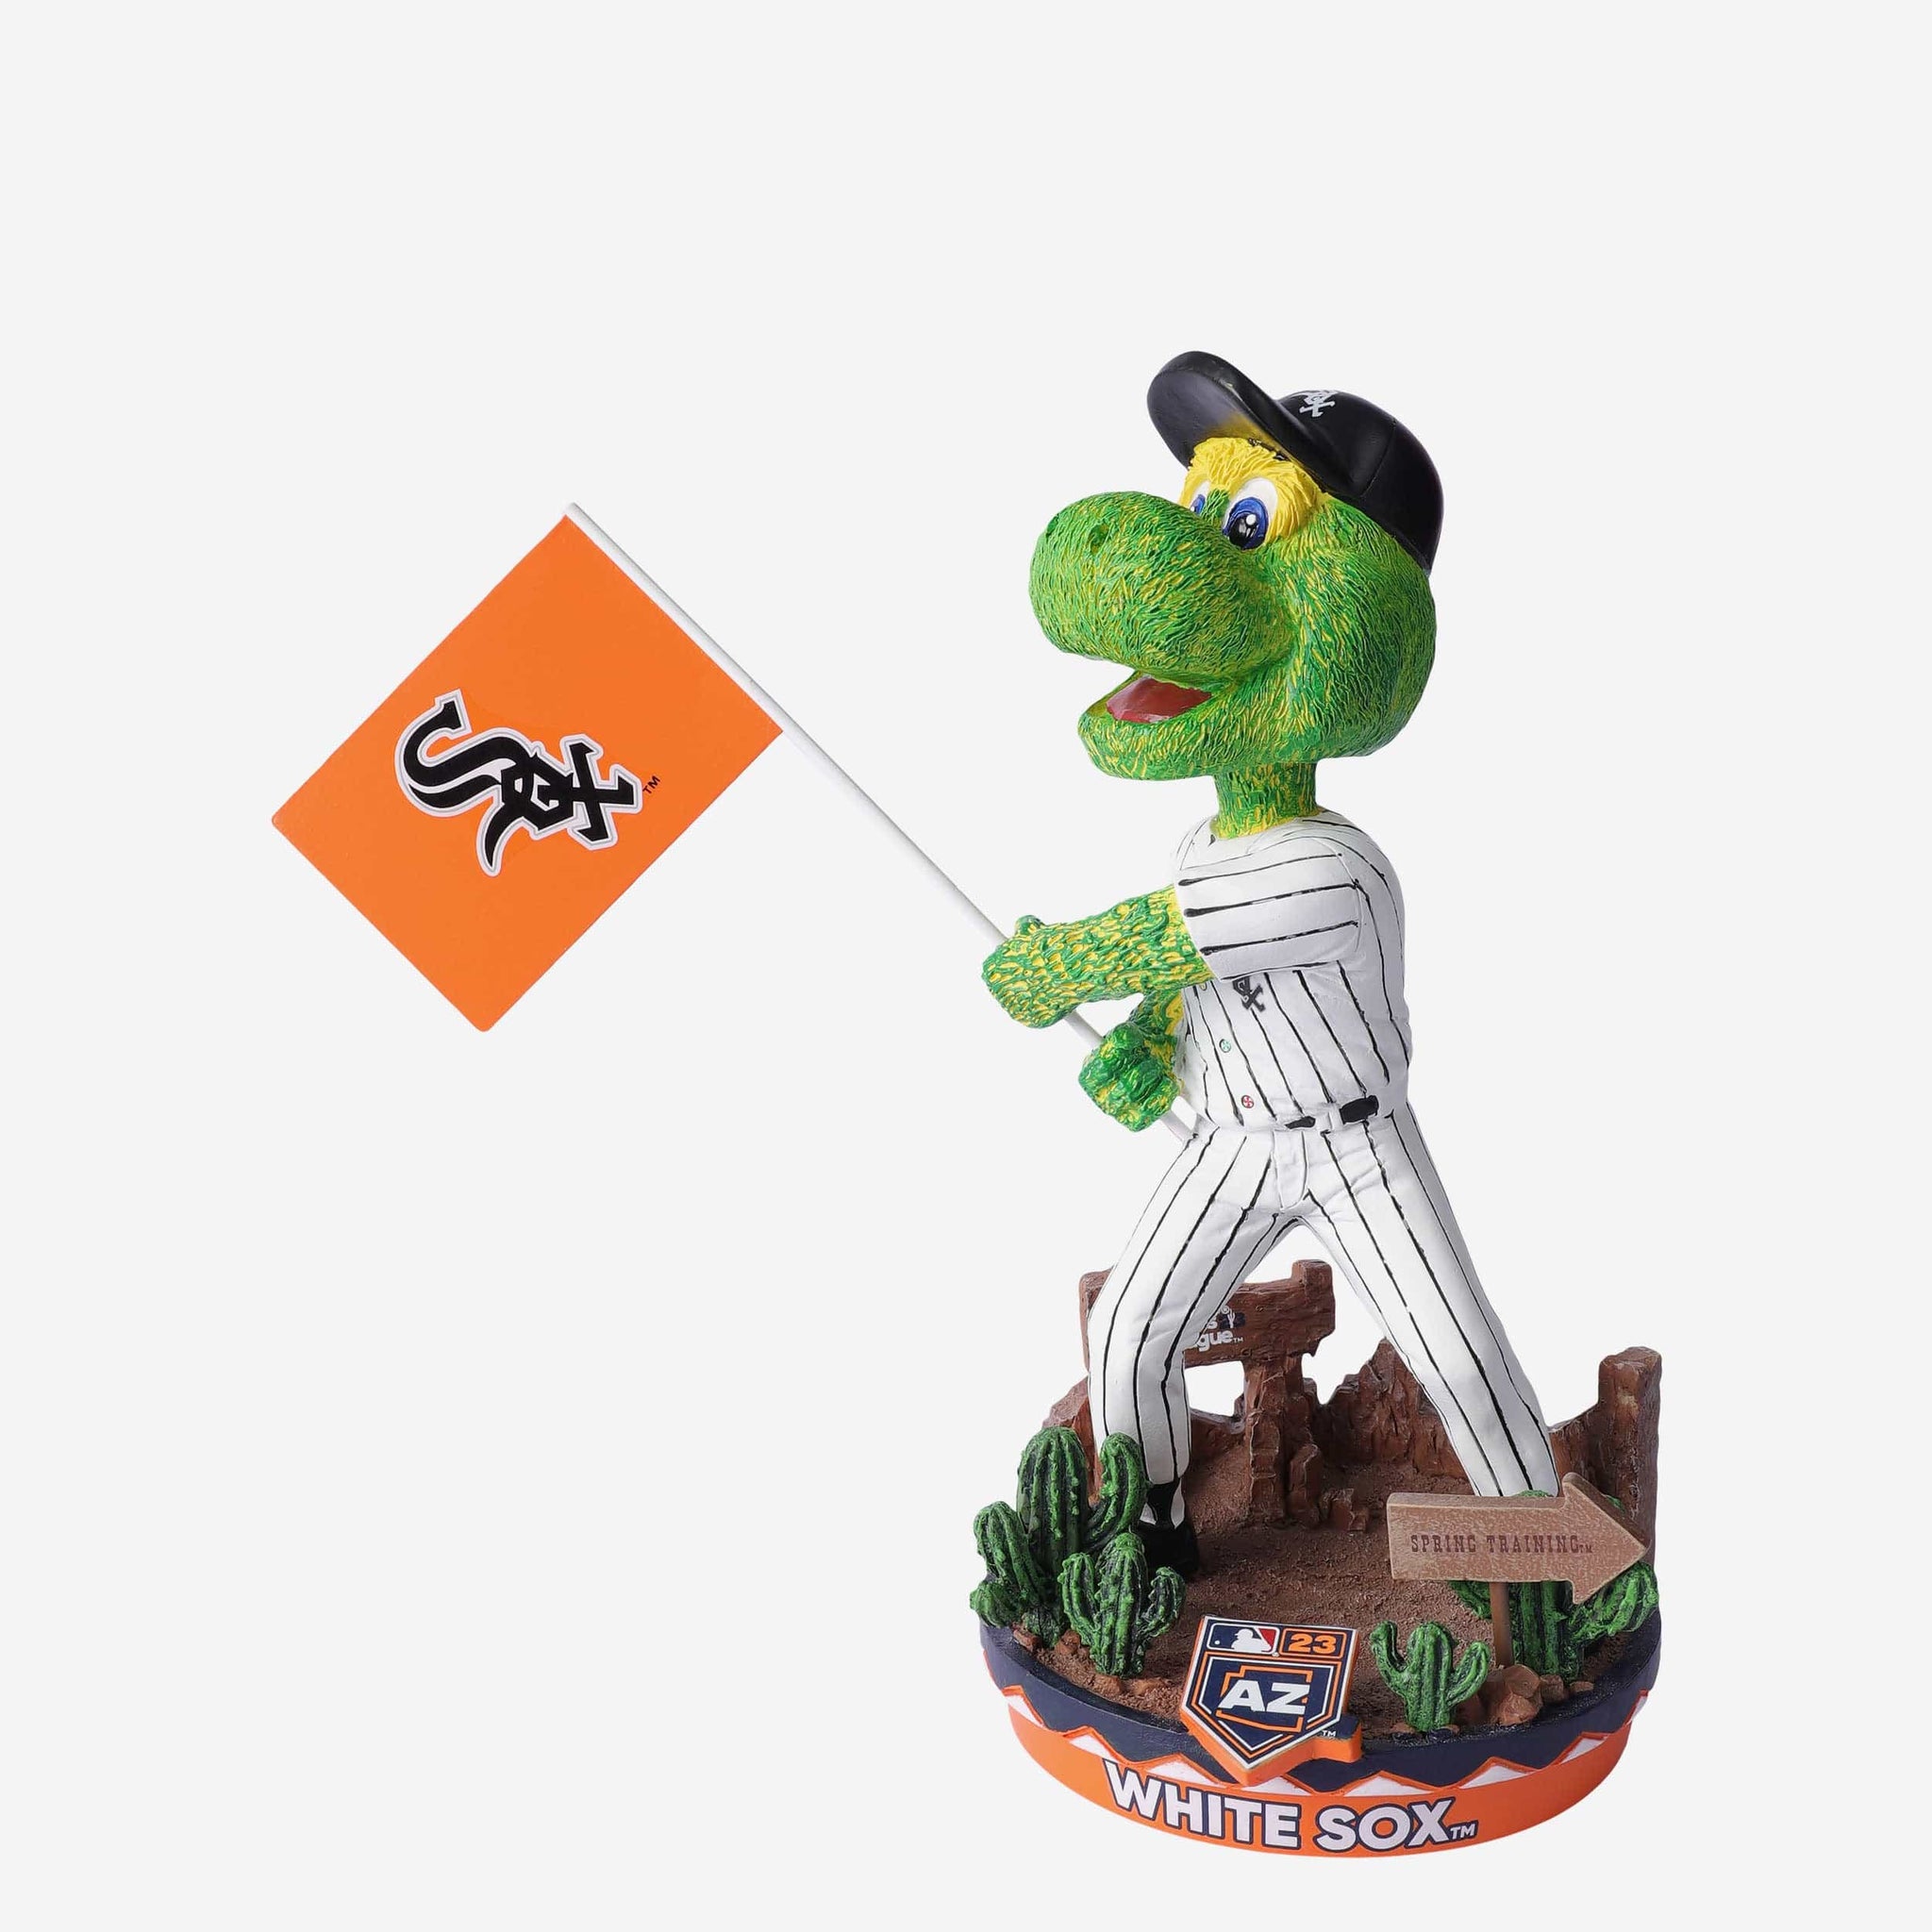 Southpaw Chicago White Sox Gate Series Mascot Bobblehead Officially Licensed by MLB